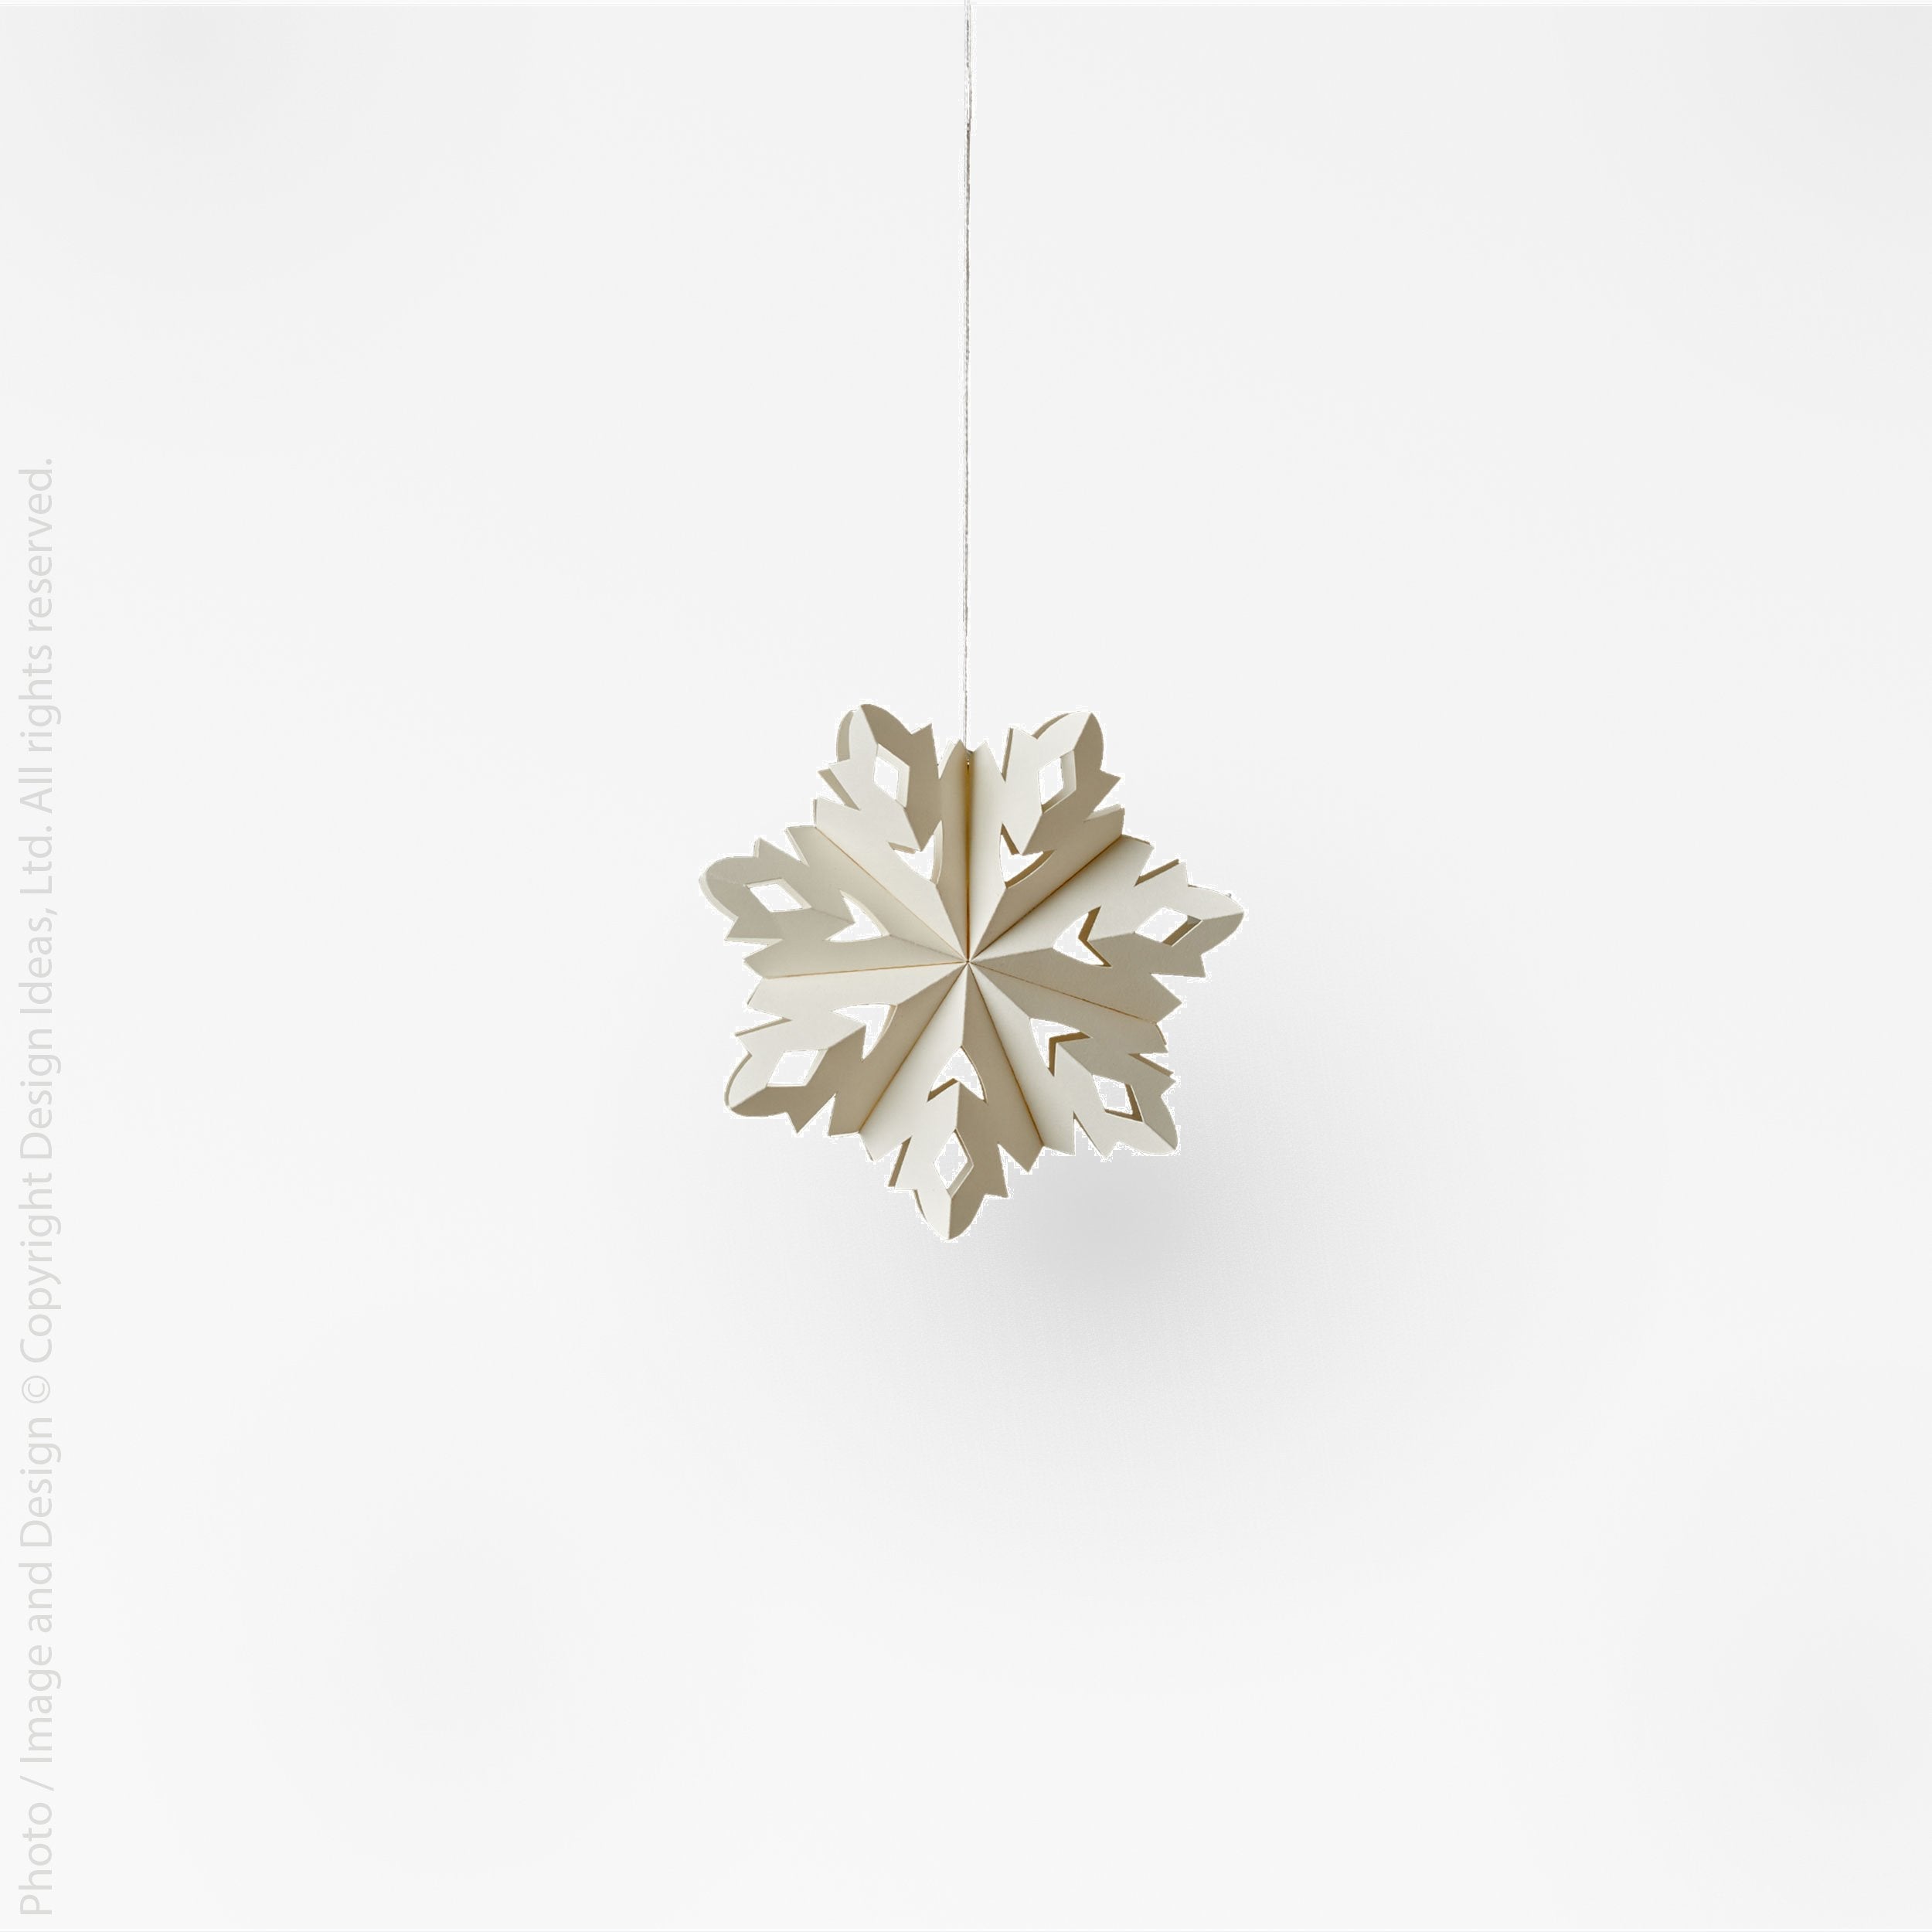 Crystal Snowflake Ornament - Little Bins for Little Hands